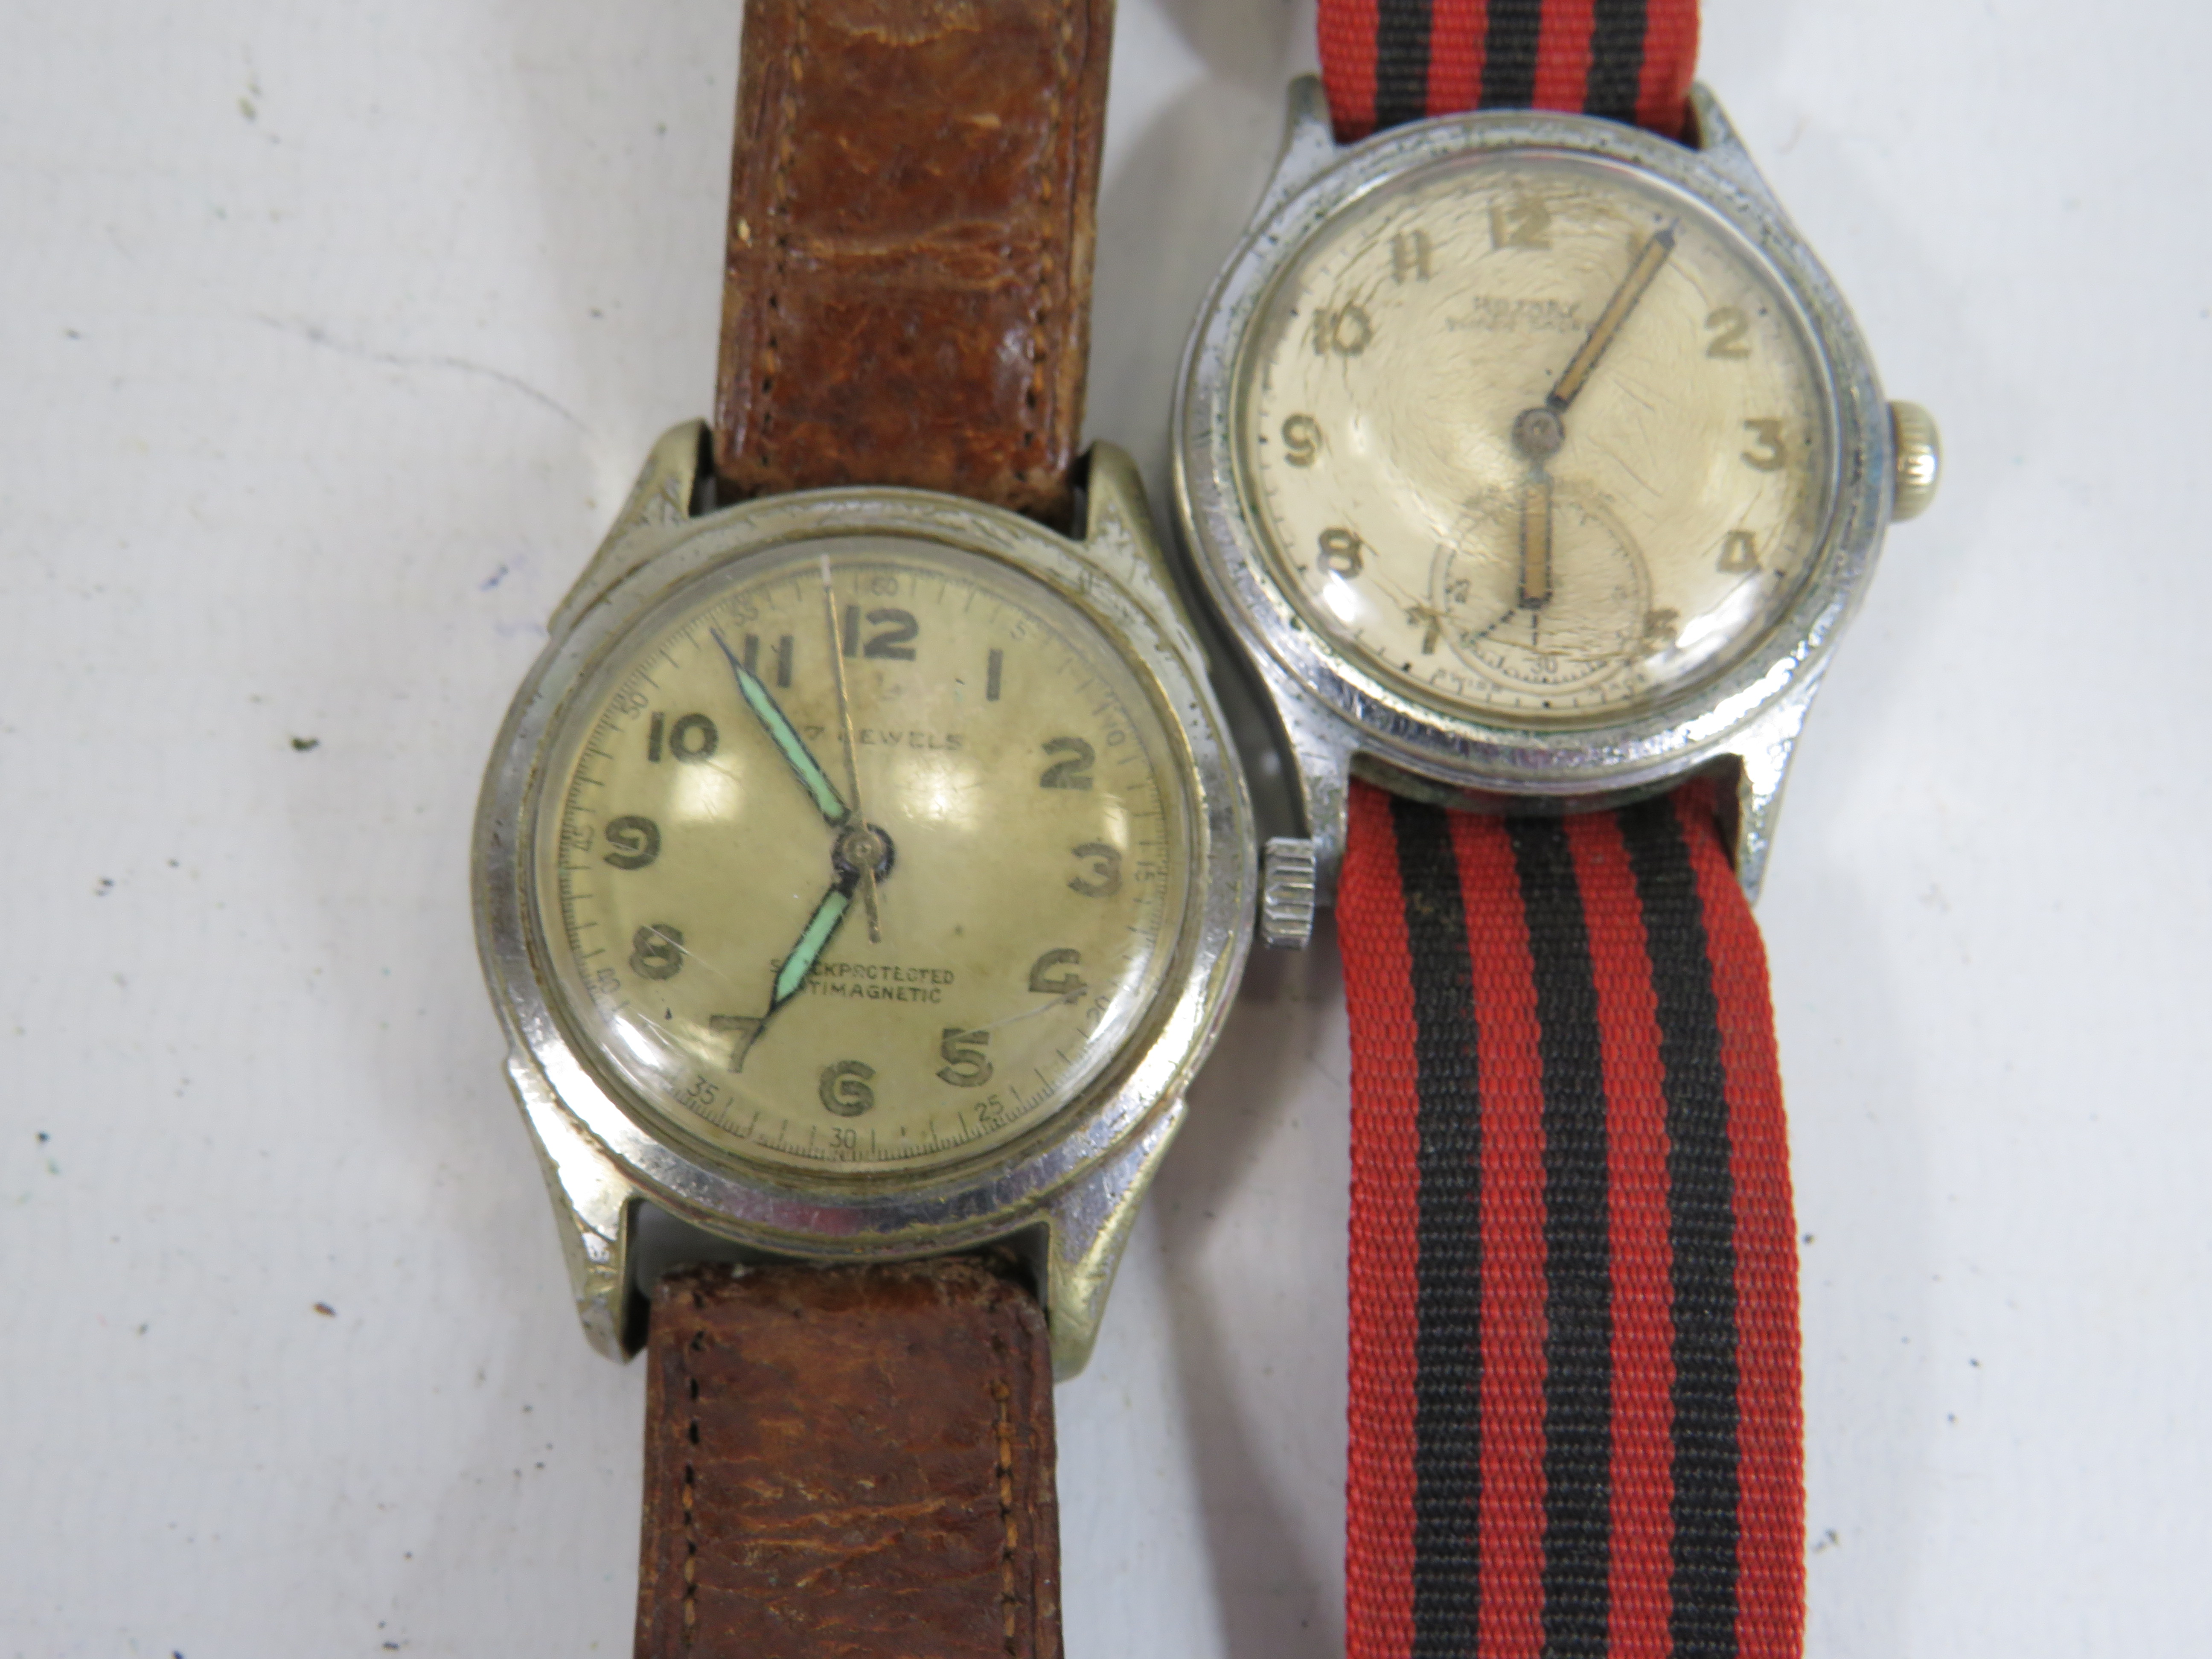 Gents Vintage Military Style Wristwatches Hand-wind WORKING Inc. Rotary Etc. x 2 406370 - Image 2 of 3